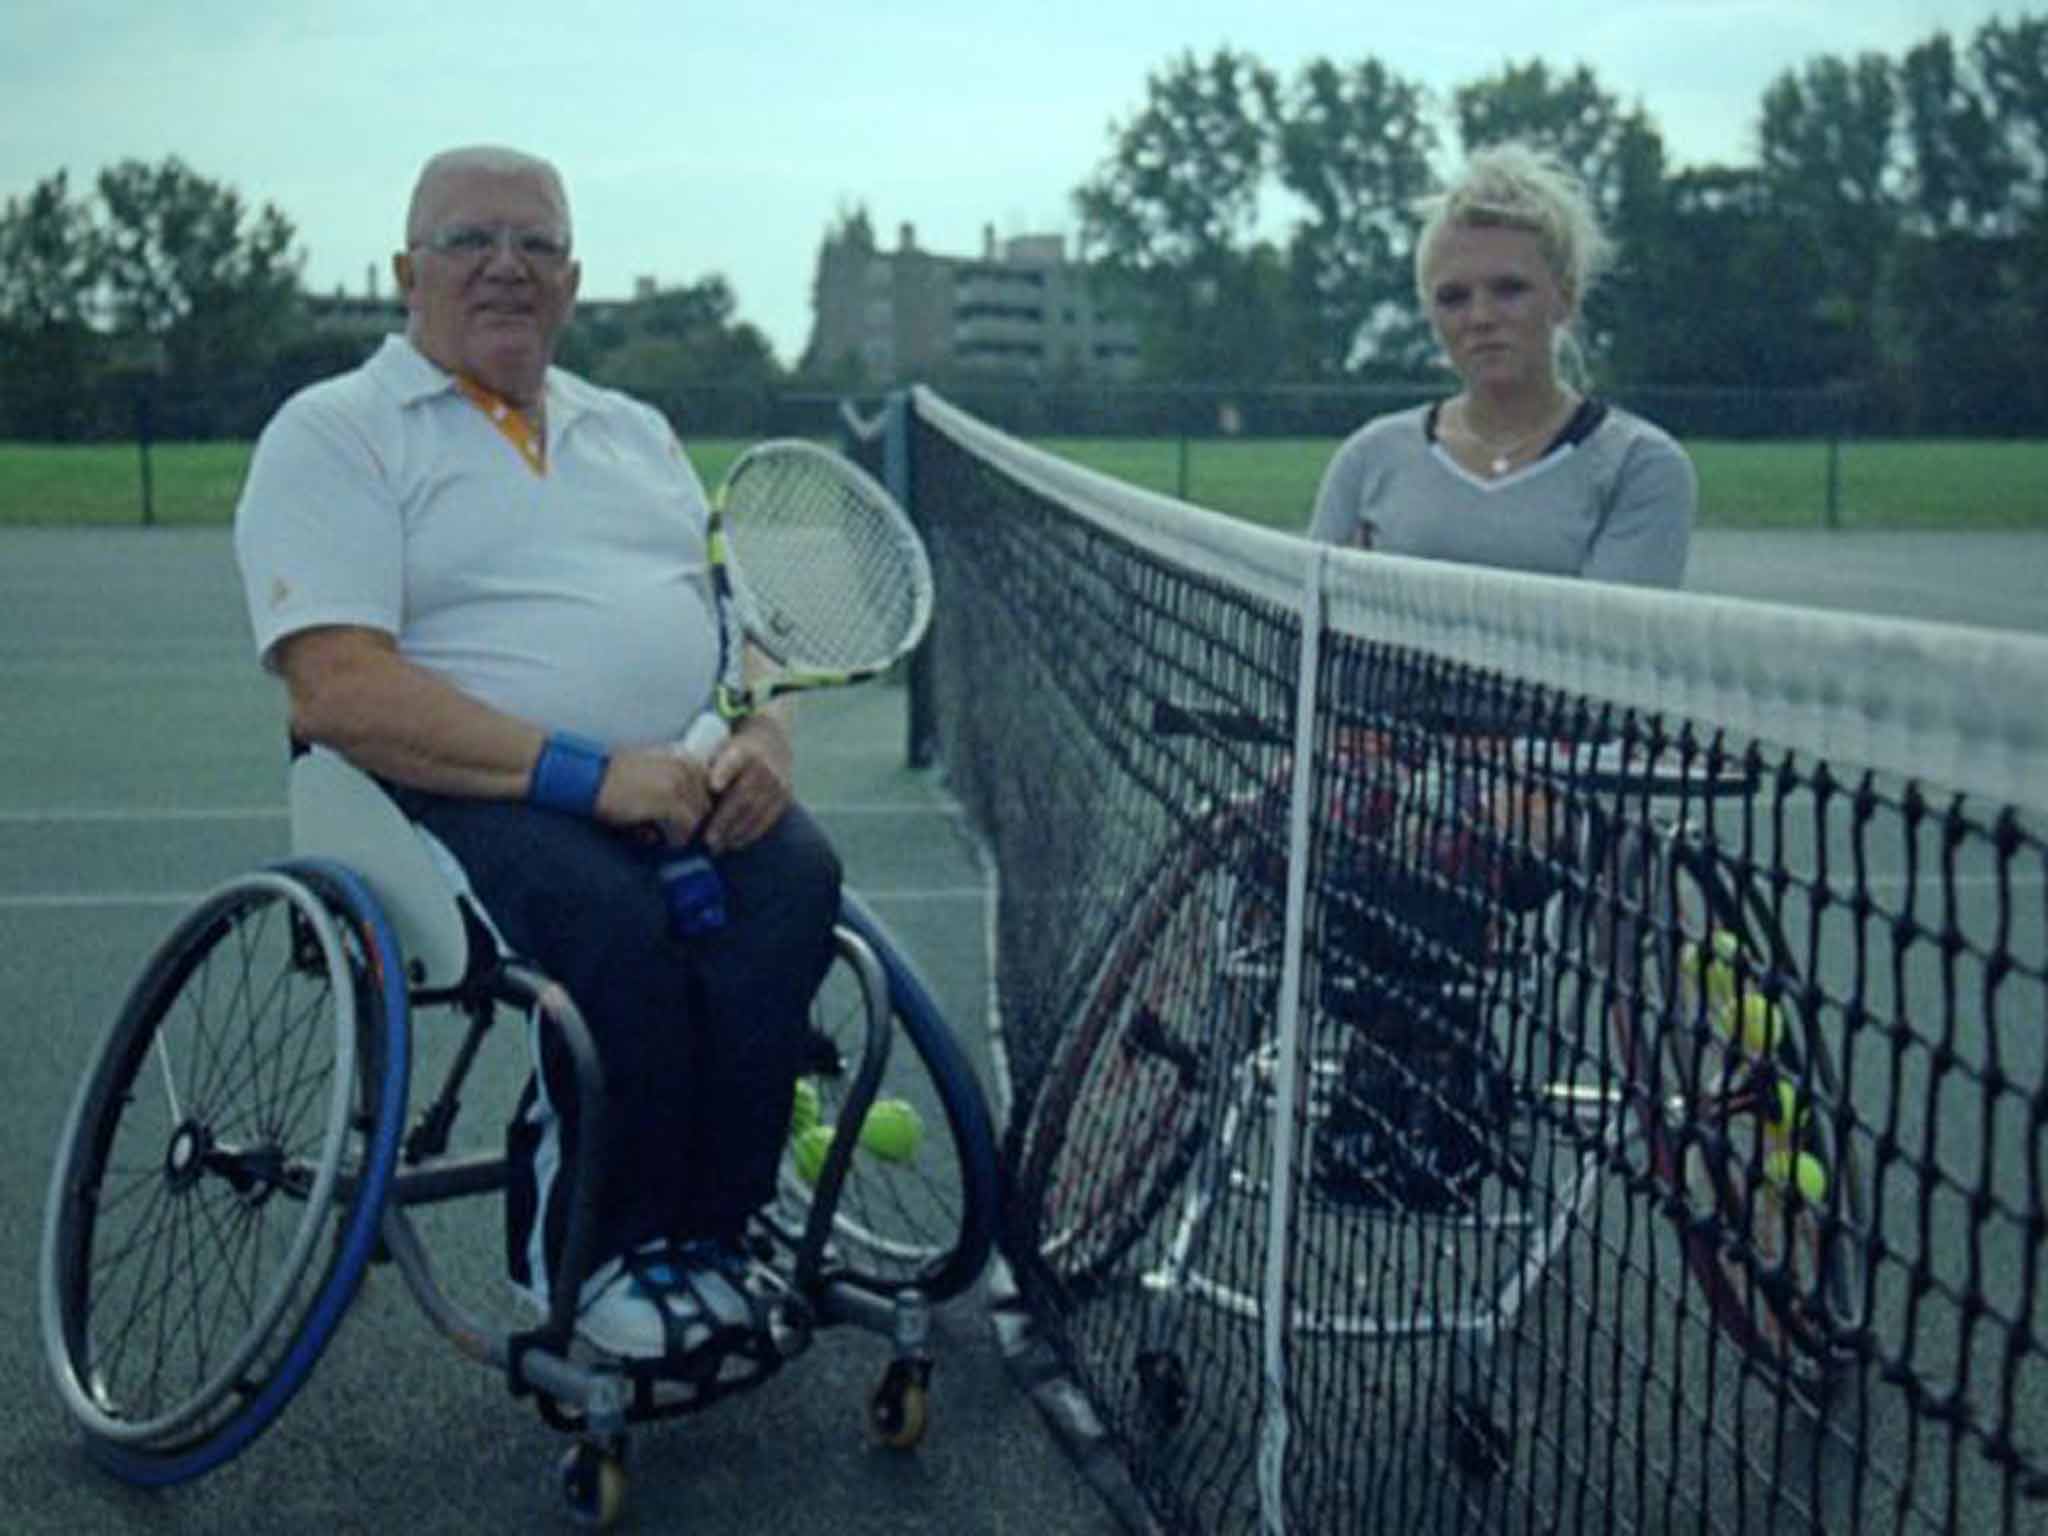 Jordanne Whiley and her father, Keith, who won a bronze medal in the 1984 Paralympics